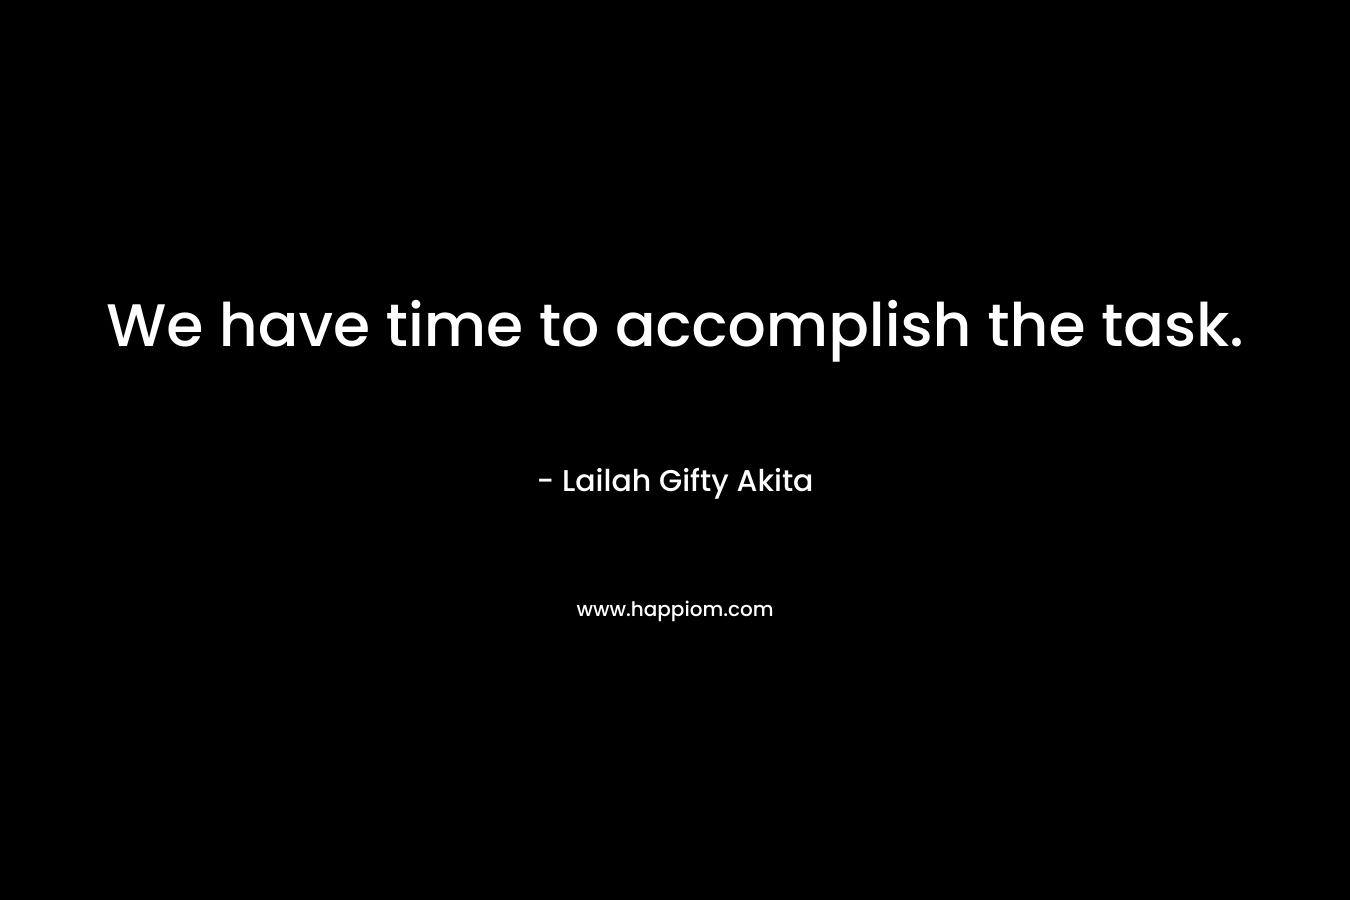 We have time to accomplish the task.